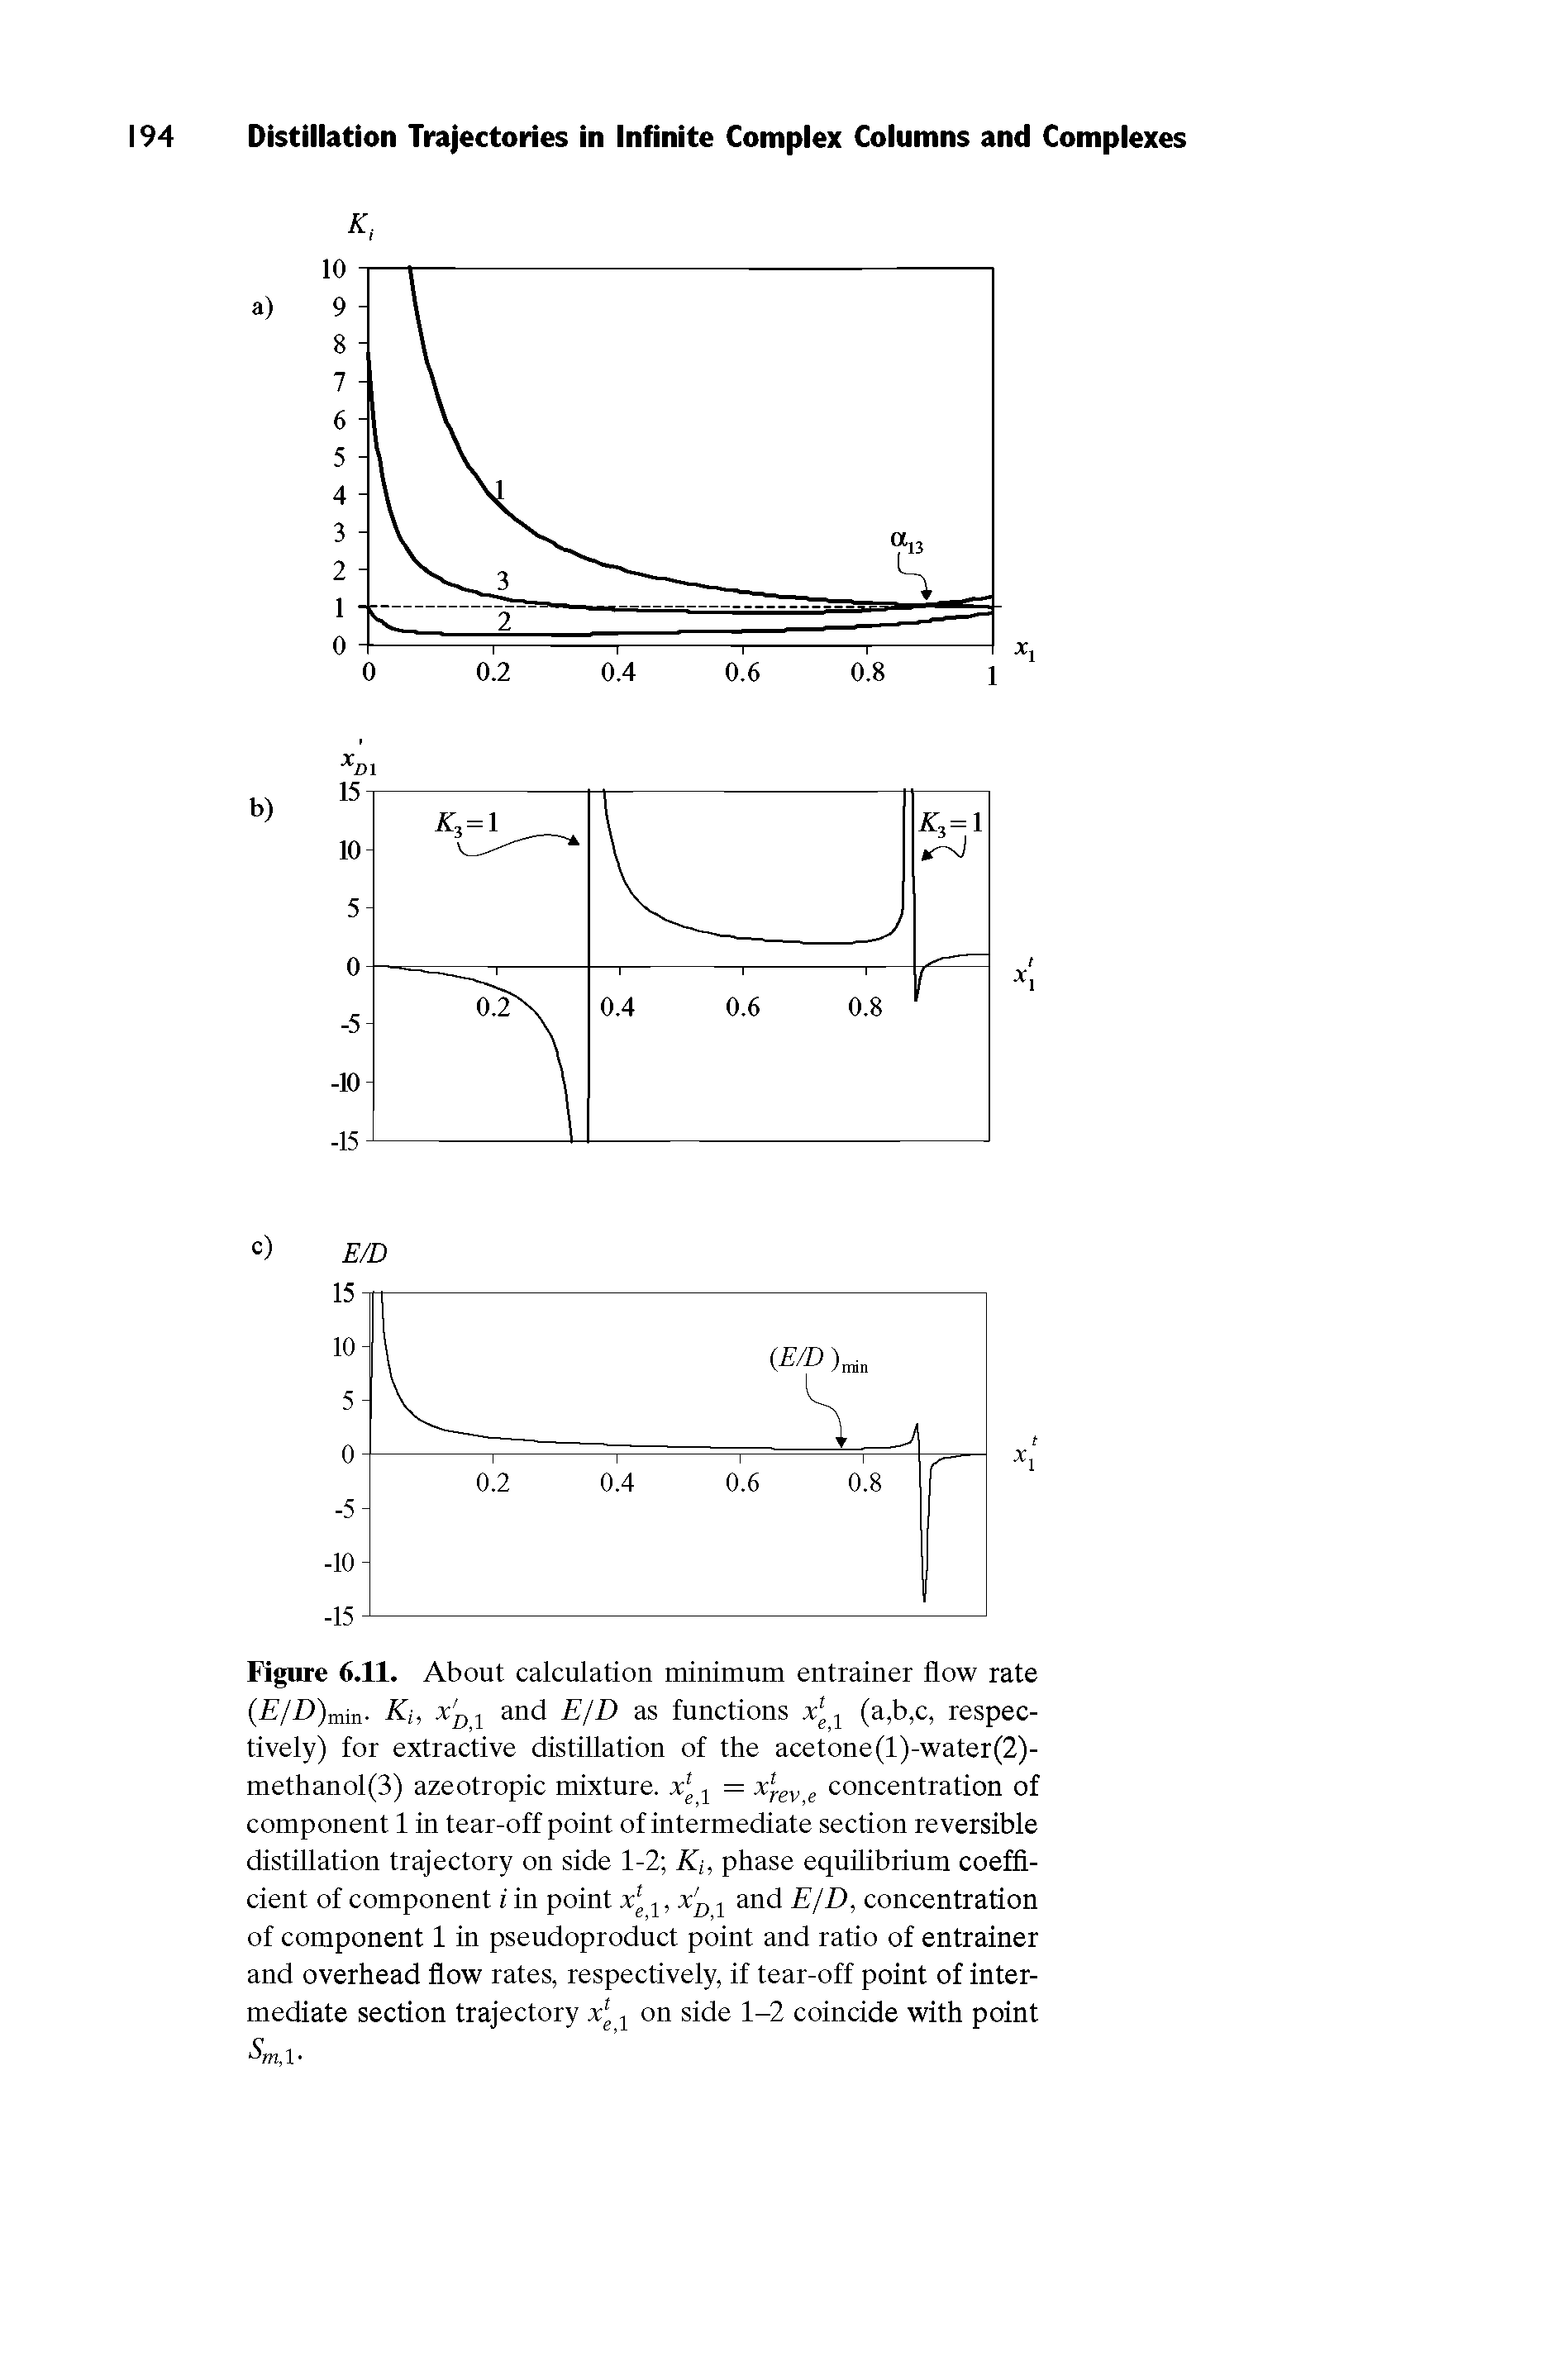 Figure 6.11. About calculation minimum entrainer flow rate E/D)ram- Ki, j and E/D as functions x j (a,b,c, respectively) for extractive distillation of the acetone(l)-water(2)-methanol(3) azeotropic mixture. x[ j = x g concentration of component 1 in tear-off point of intermediate section reversible distillation trajectory on side 1-2 Ki, phase equilibrium coefficient of component i in point j, x), j and E/D, concentration of component 1 in pseudoproduct point and ratio of entrainer and overhead flow rates, respectively, if tear-off point of intermediate section trajectory xj j on side 1-2 coincide with point...